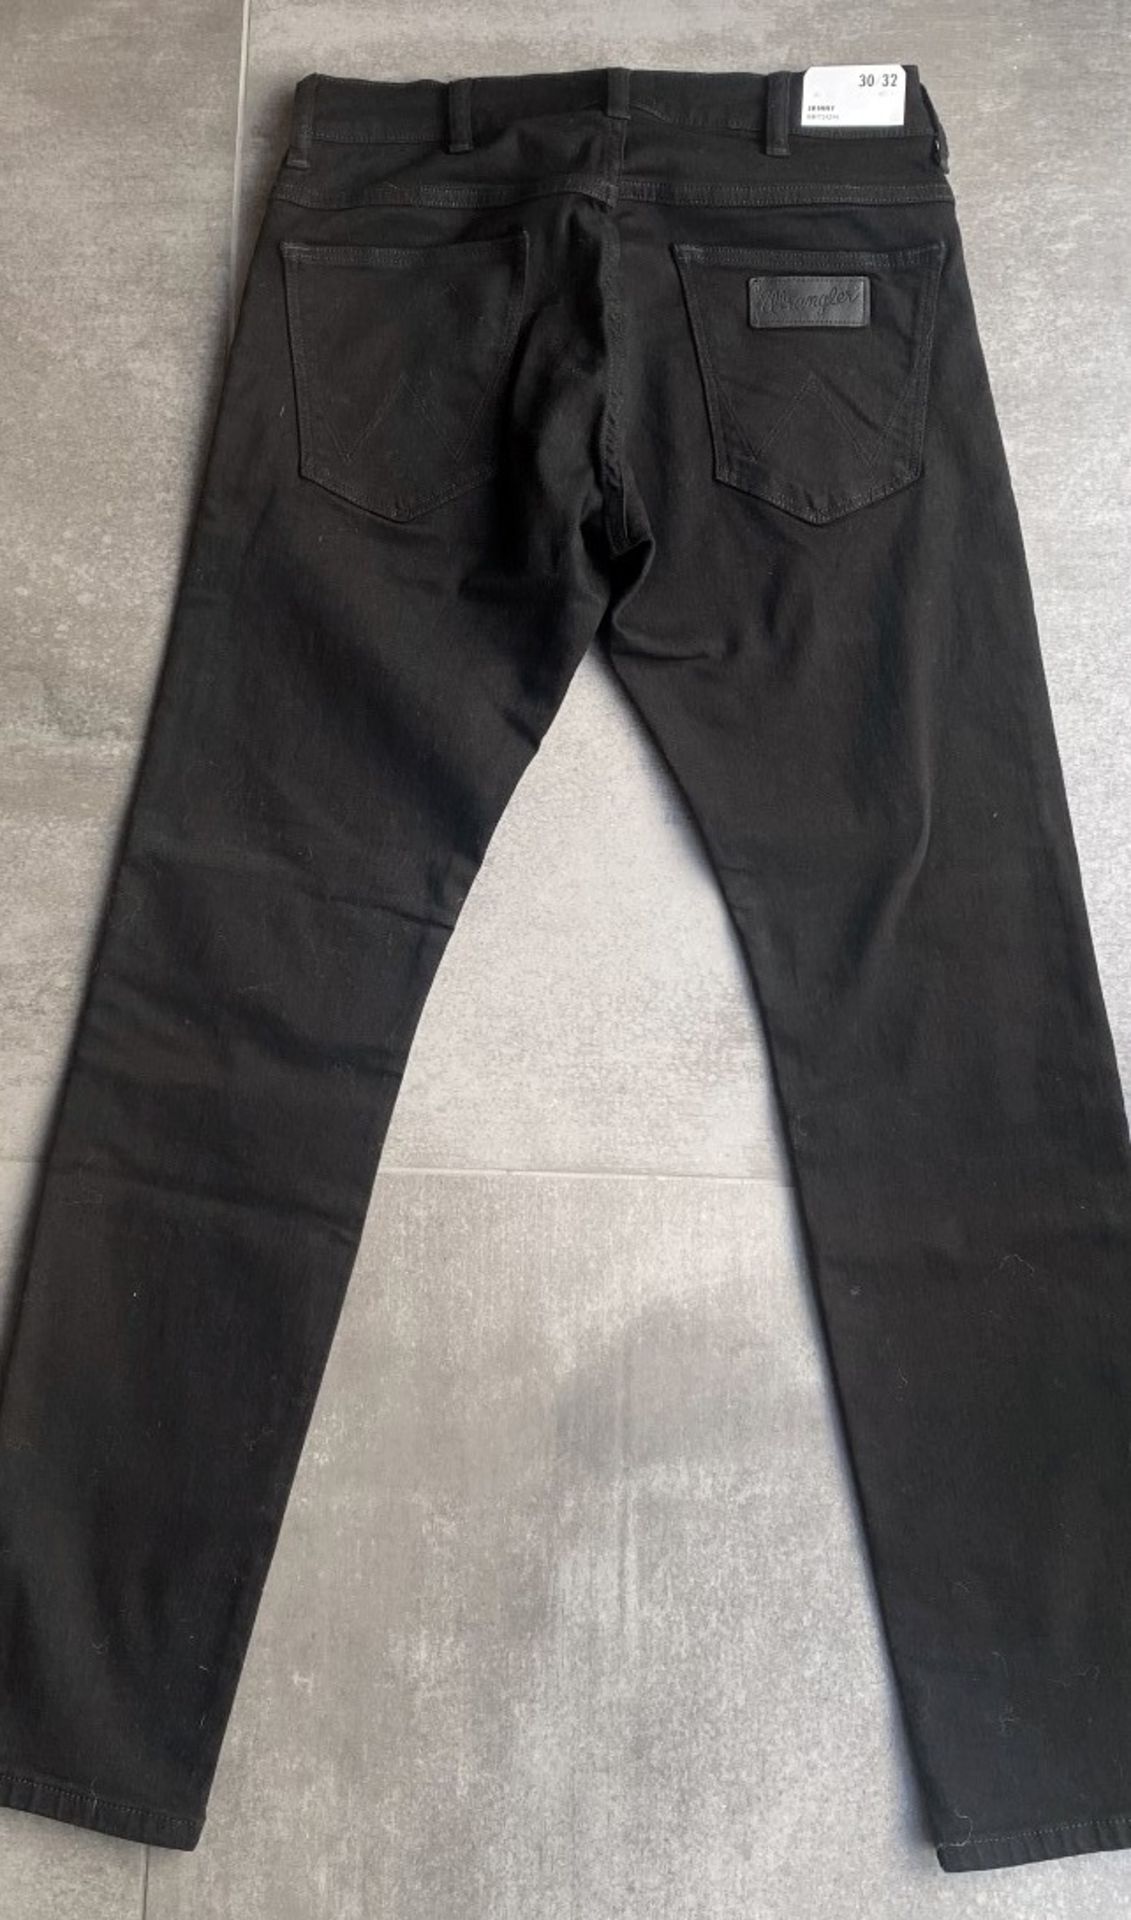 1 x Pair Of Men's Genuine Wrangler Jeans In Black - Size: 30/32 - Preowned, Like New With Tags - - Image 6 of 10